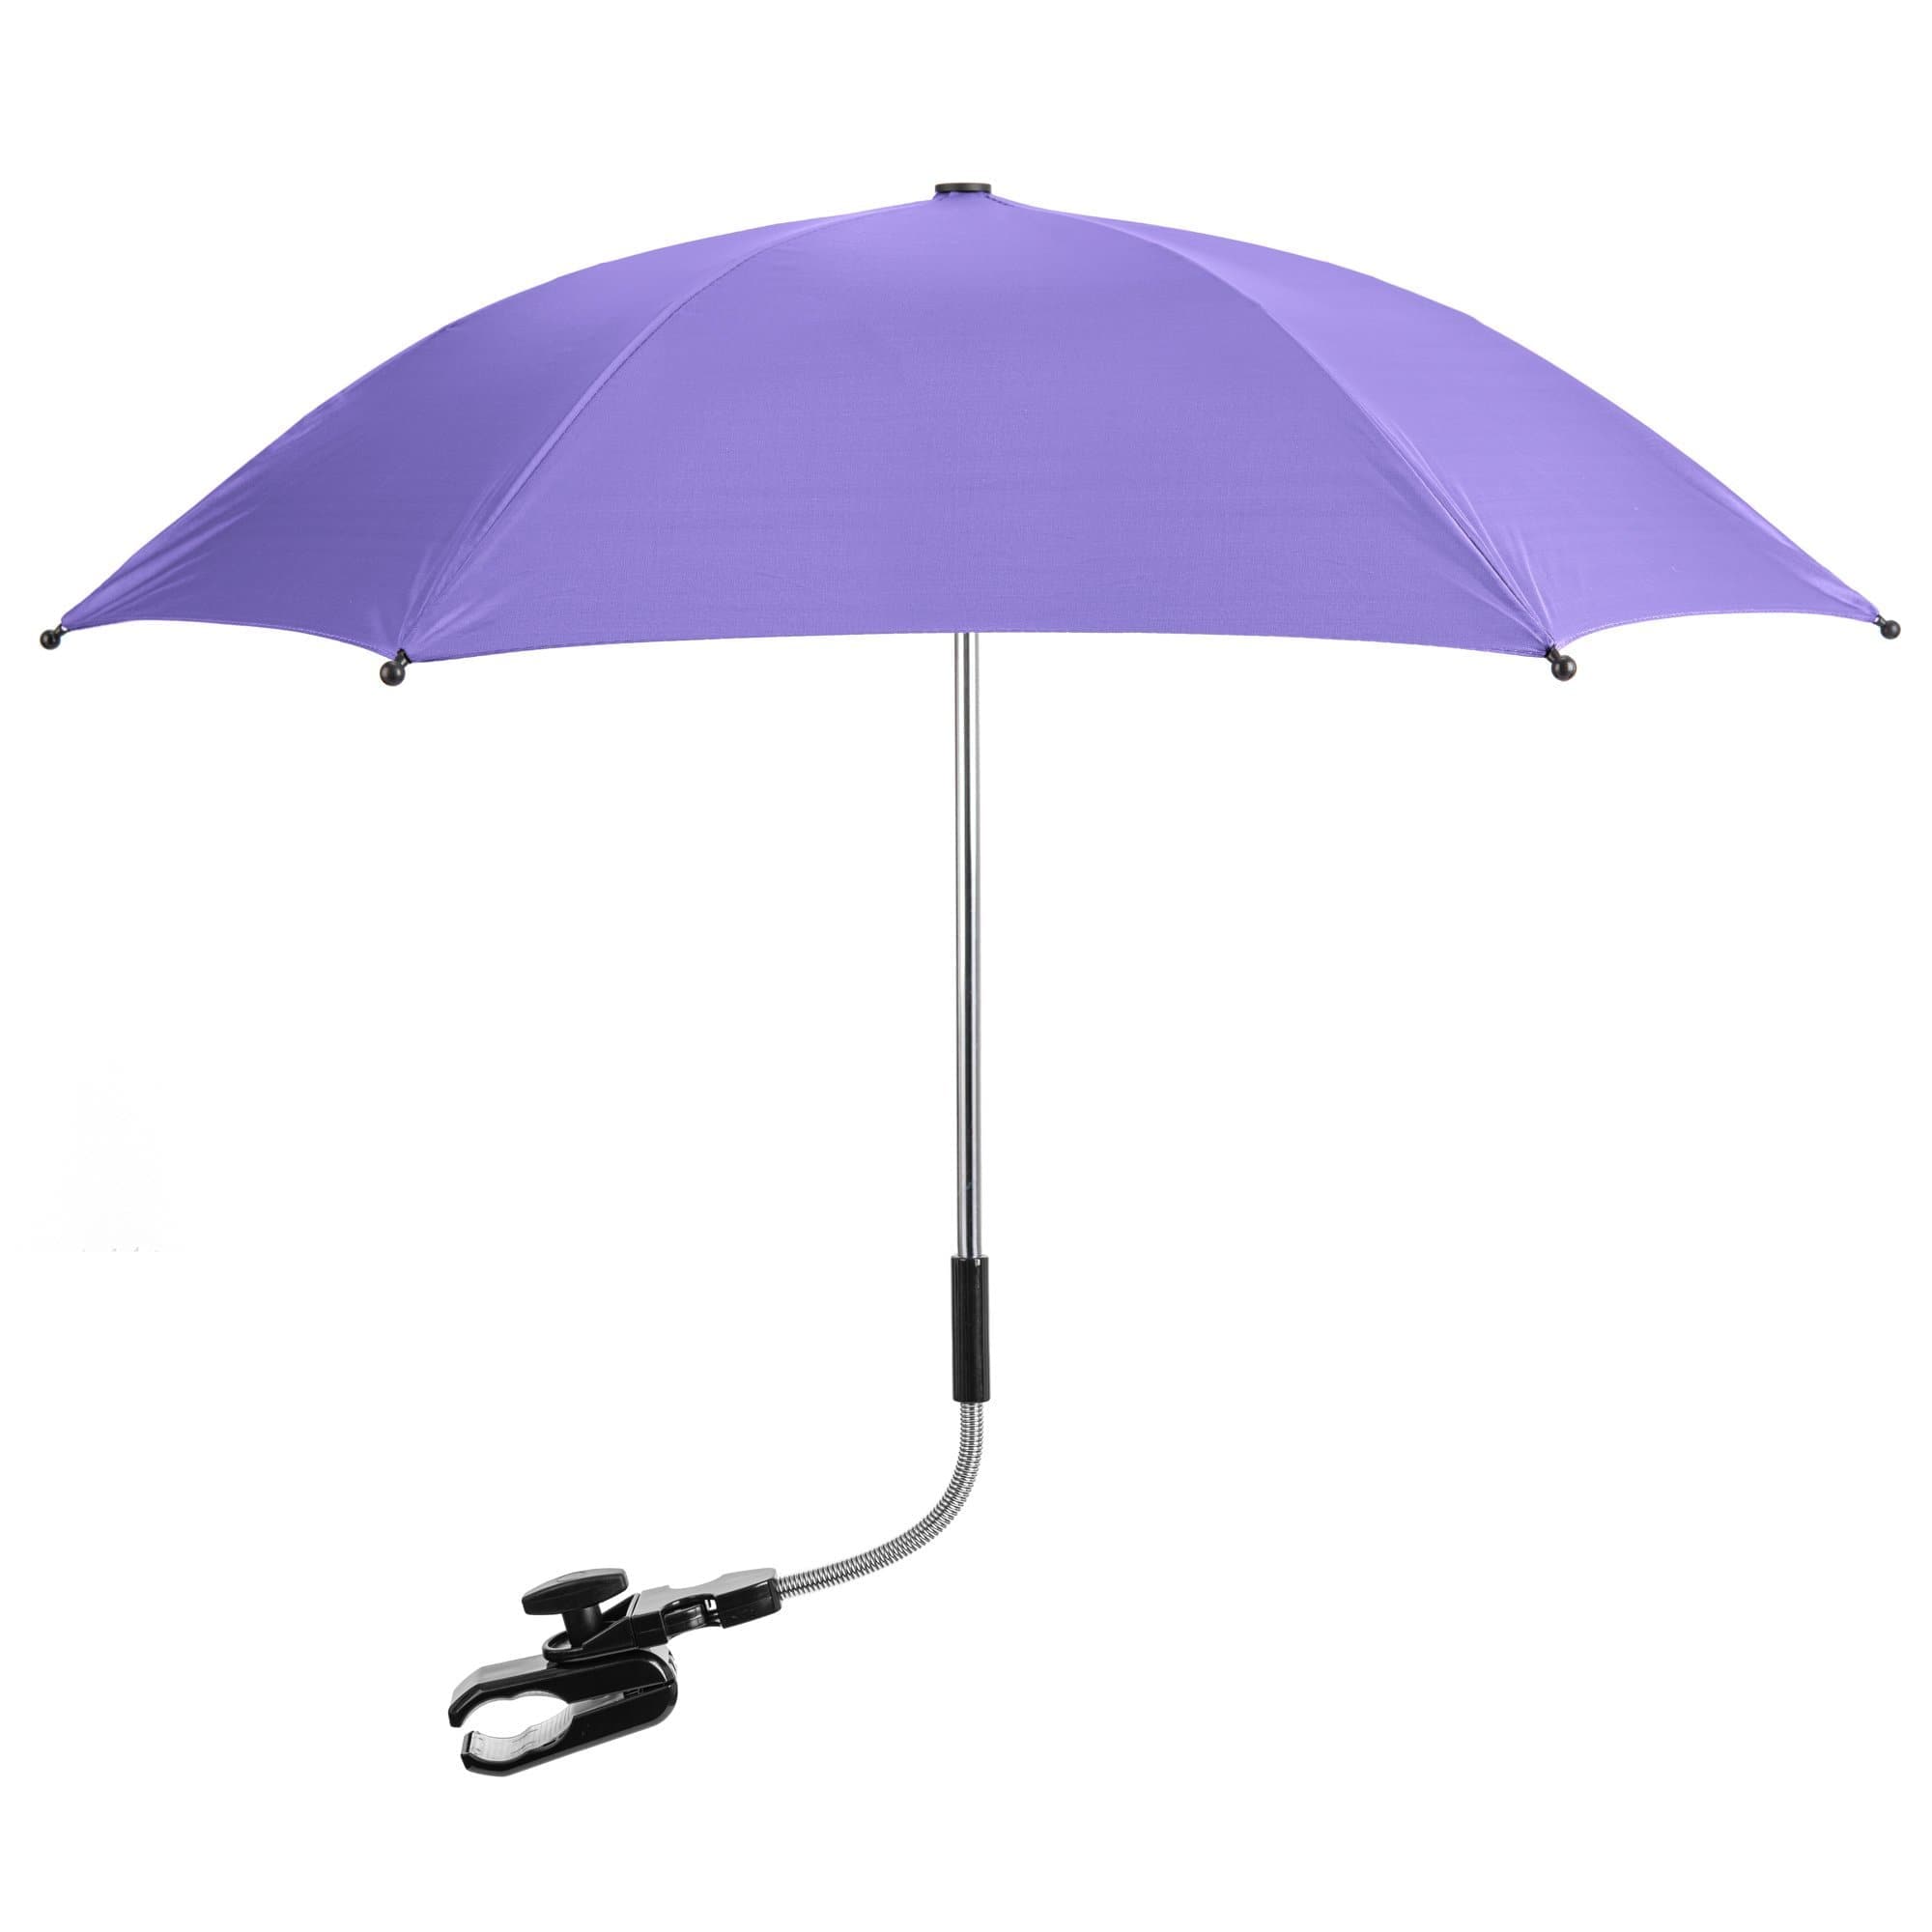 Baby Parasol Compatible With Greentom - Fits All Models - For Your Little One